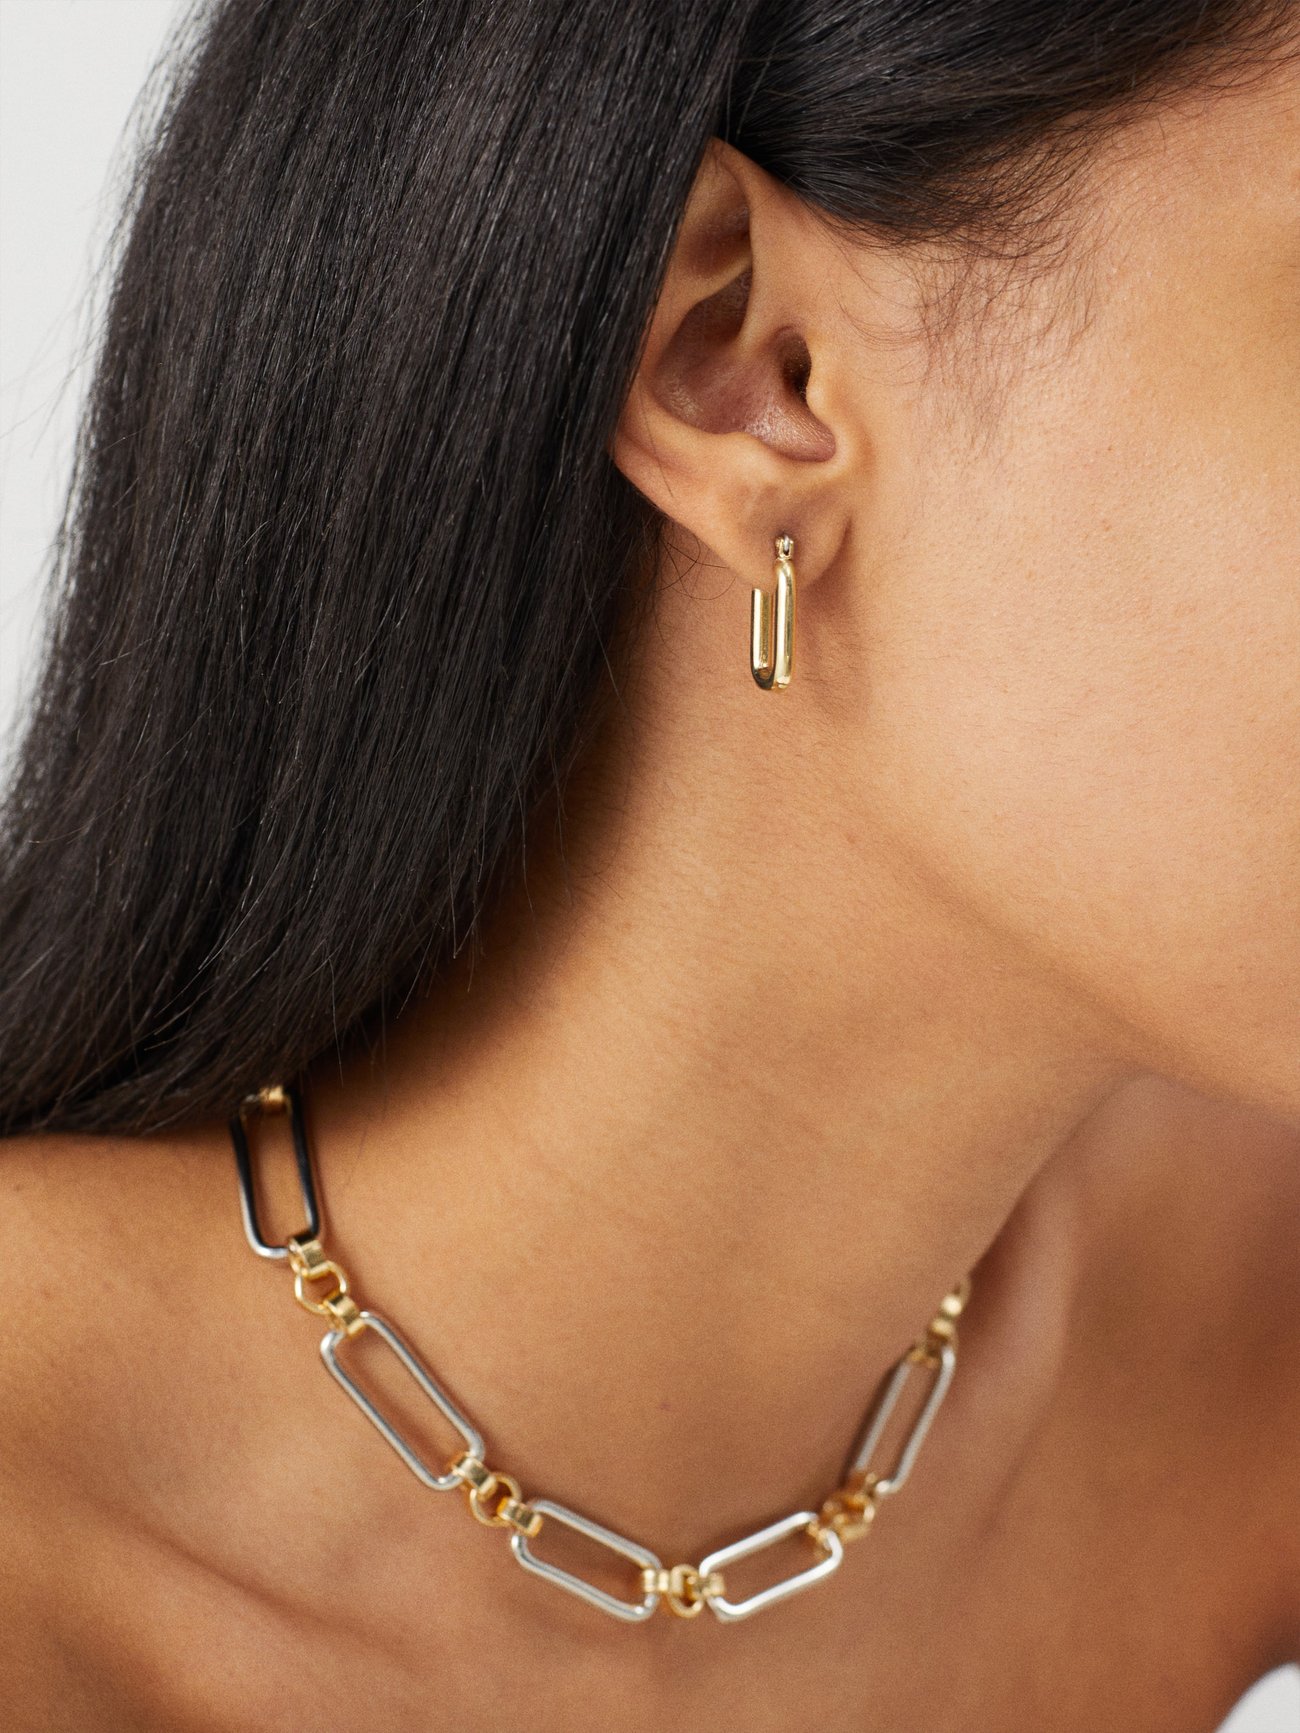 Gold Cresca 14kt gold-plated hoop earrings | Laura Lombardi